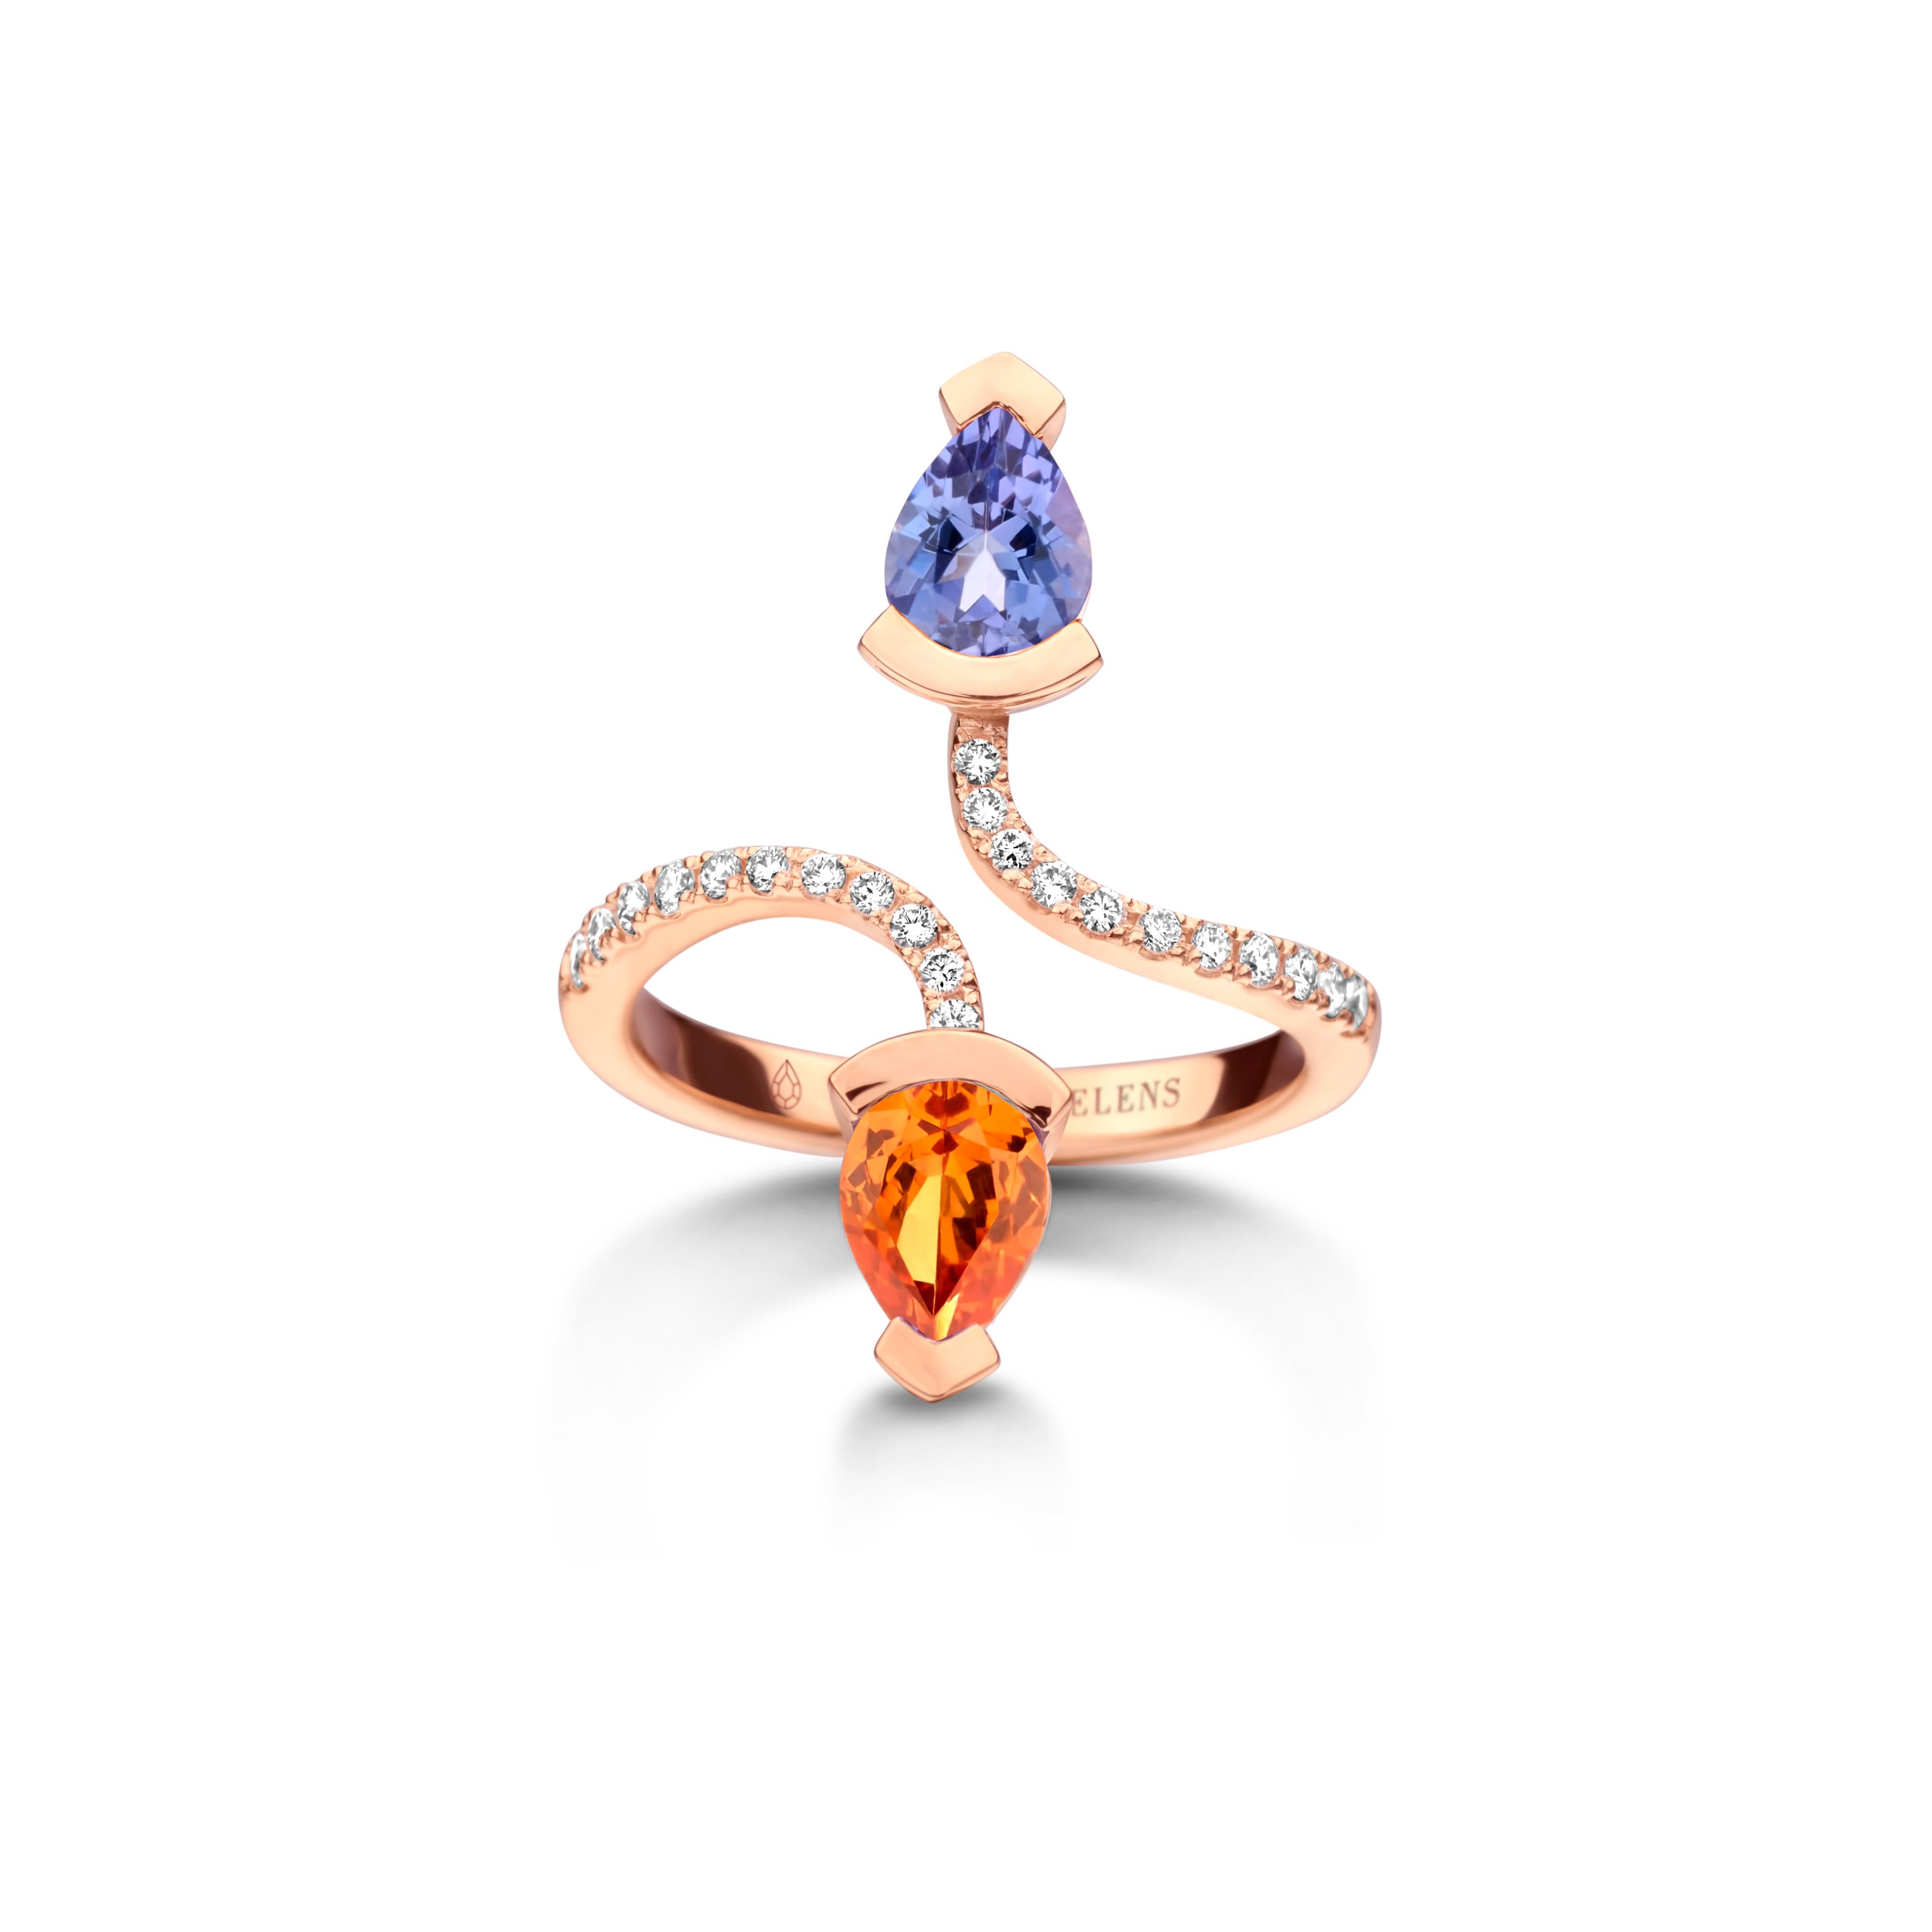 Adeline Duo ring in 18Kt yellow gold 5g set with a pear-shaped Tanzanite 0,70 Ct, a pear-shaped mandarin garnet 0,70 Ct and 0,19 Ct of white brilliant cut diamonds - VS F quality. Celine Roelens, a goldsmith and gemologist, is specialized in unique,